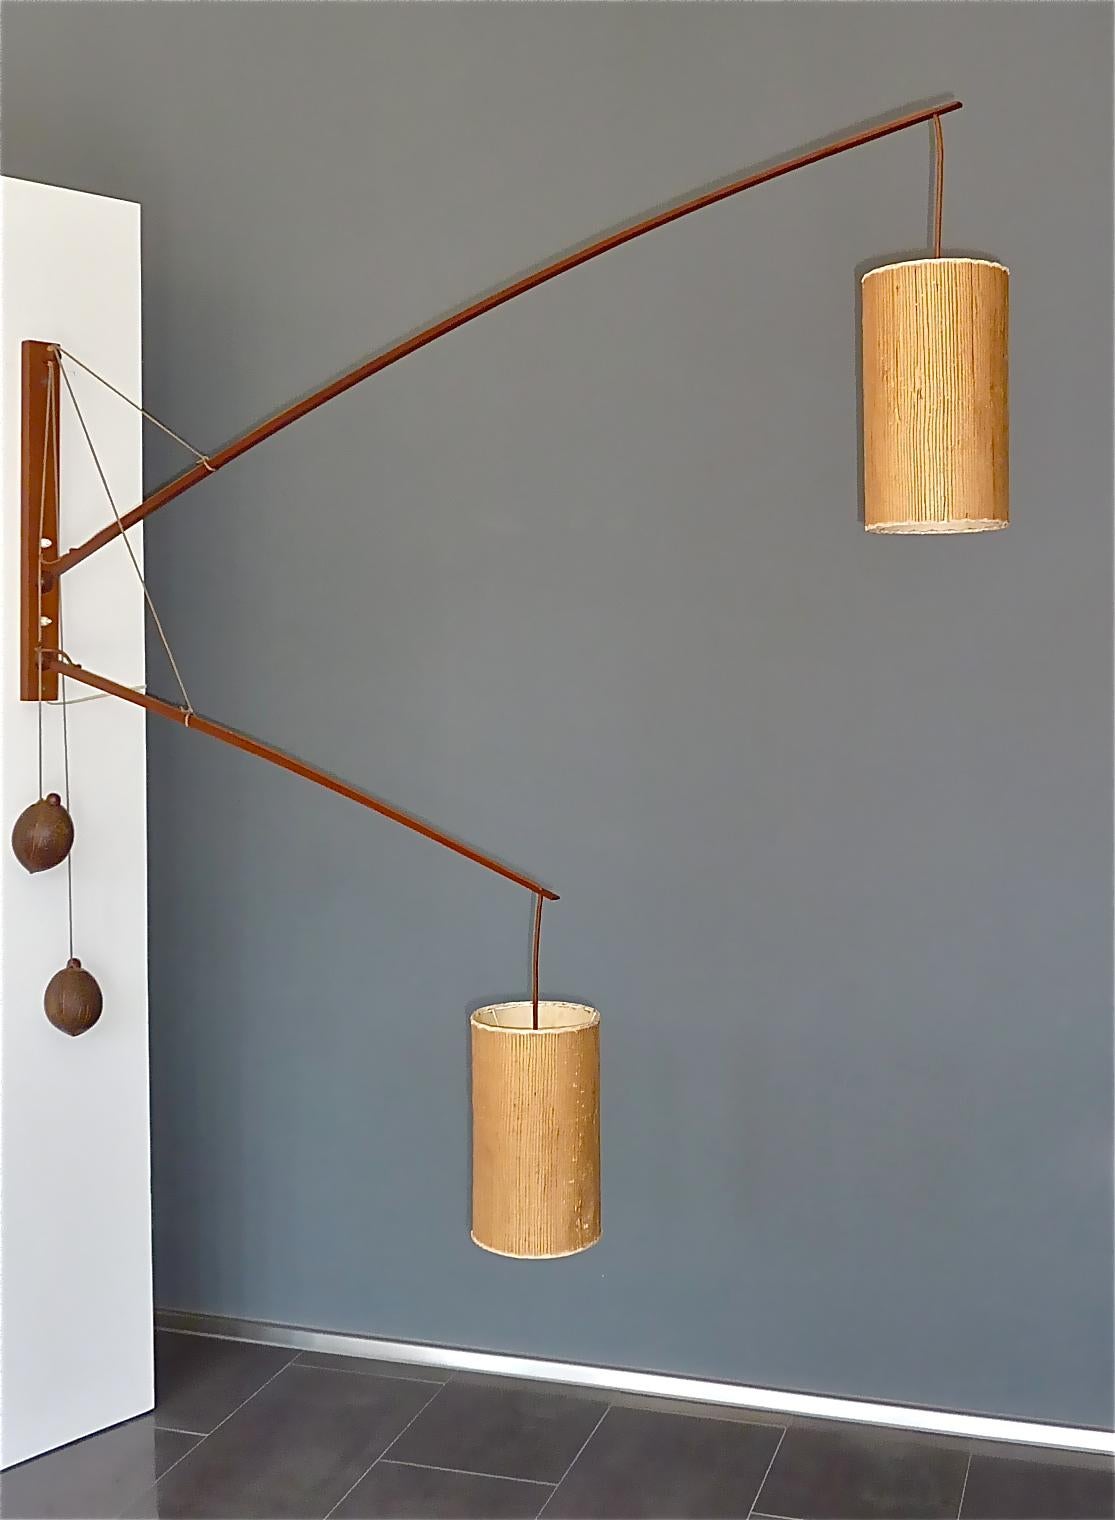 Monumental Teak Wall Lights Lamp by Rupprecht Skrip Coconut Counterweights 1950s For Sale 1